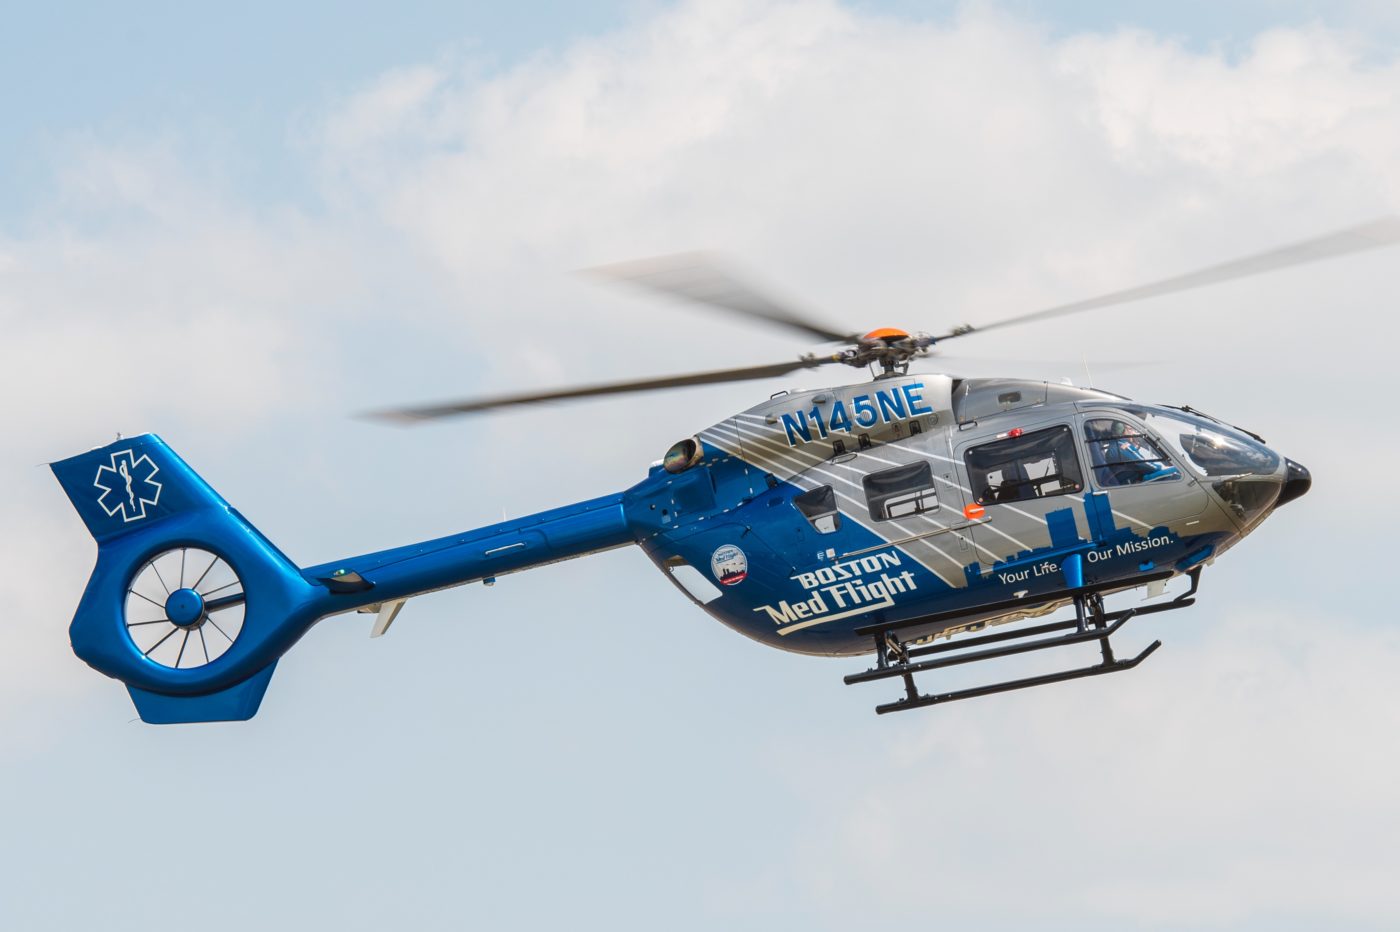 "From a safety perspective, the H145 is a great addition to our fleet," said Charles Blathras, chief operations manager for Boston MedFlight. Jay Miller Photo